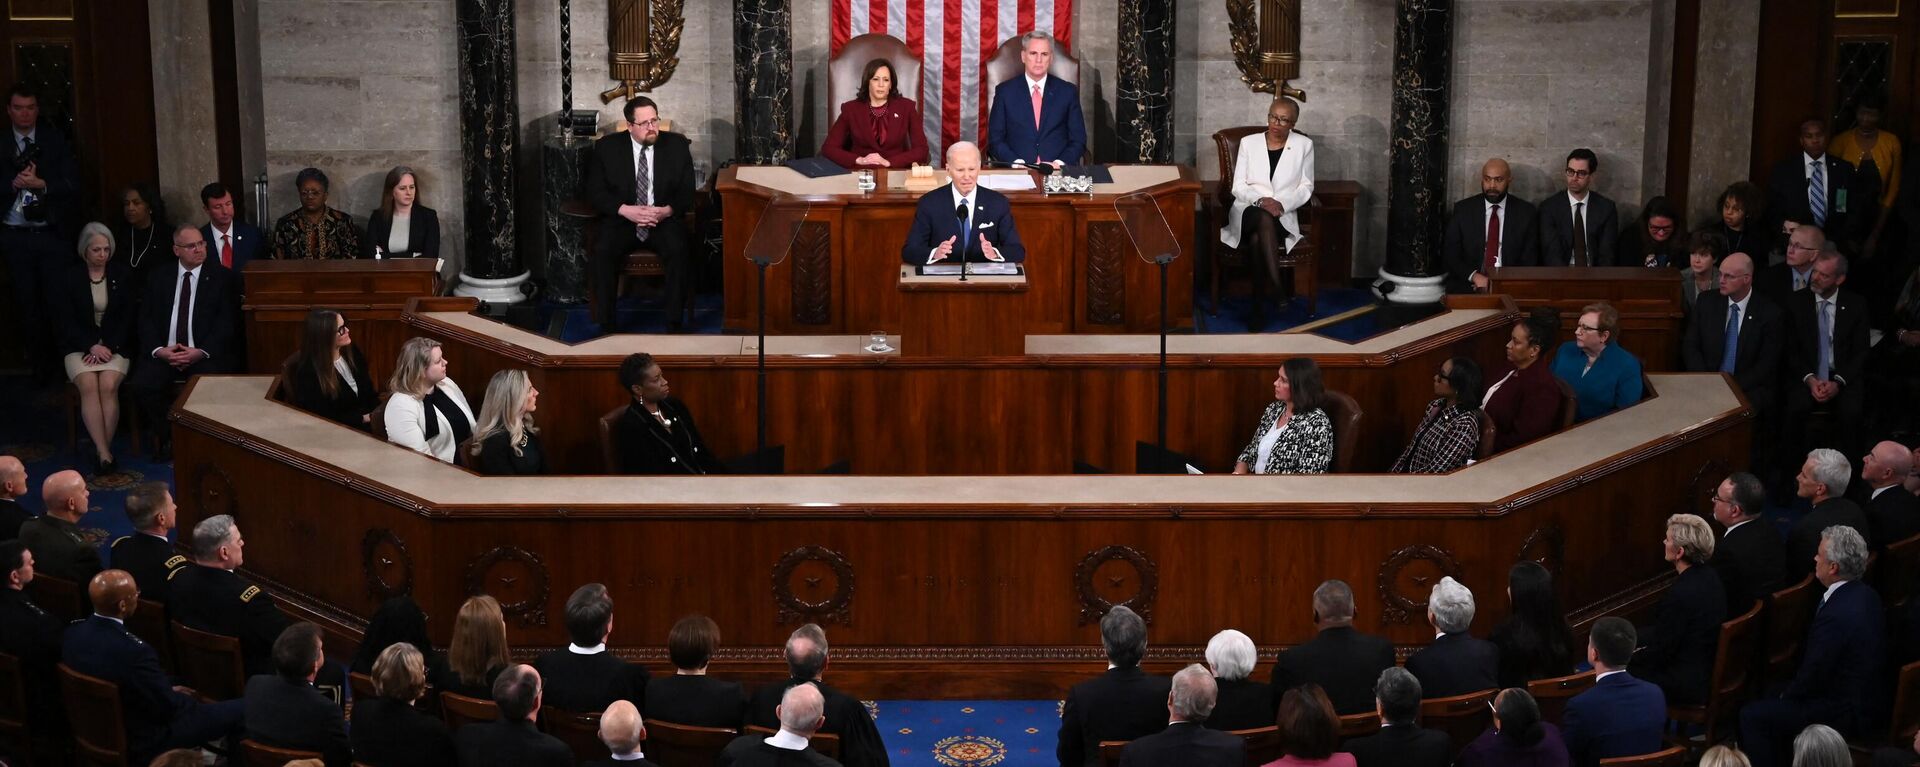 US President Joe Biden delivers the State of the Union address in the House Chamber of the US Capitol in Washington, DC, on February 7, 2023 - Sputnik International, 1920, 08.02.2023